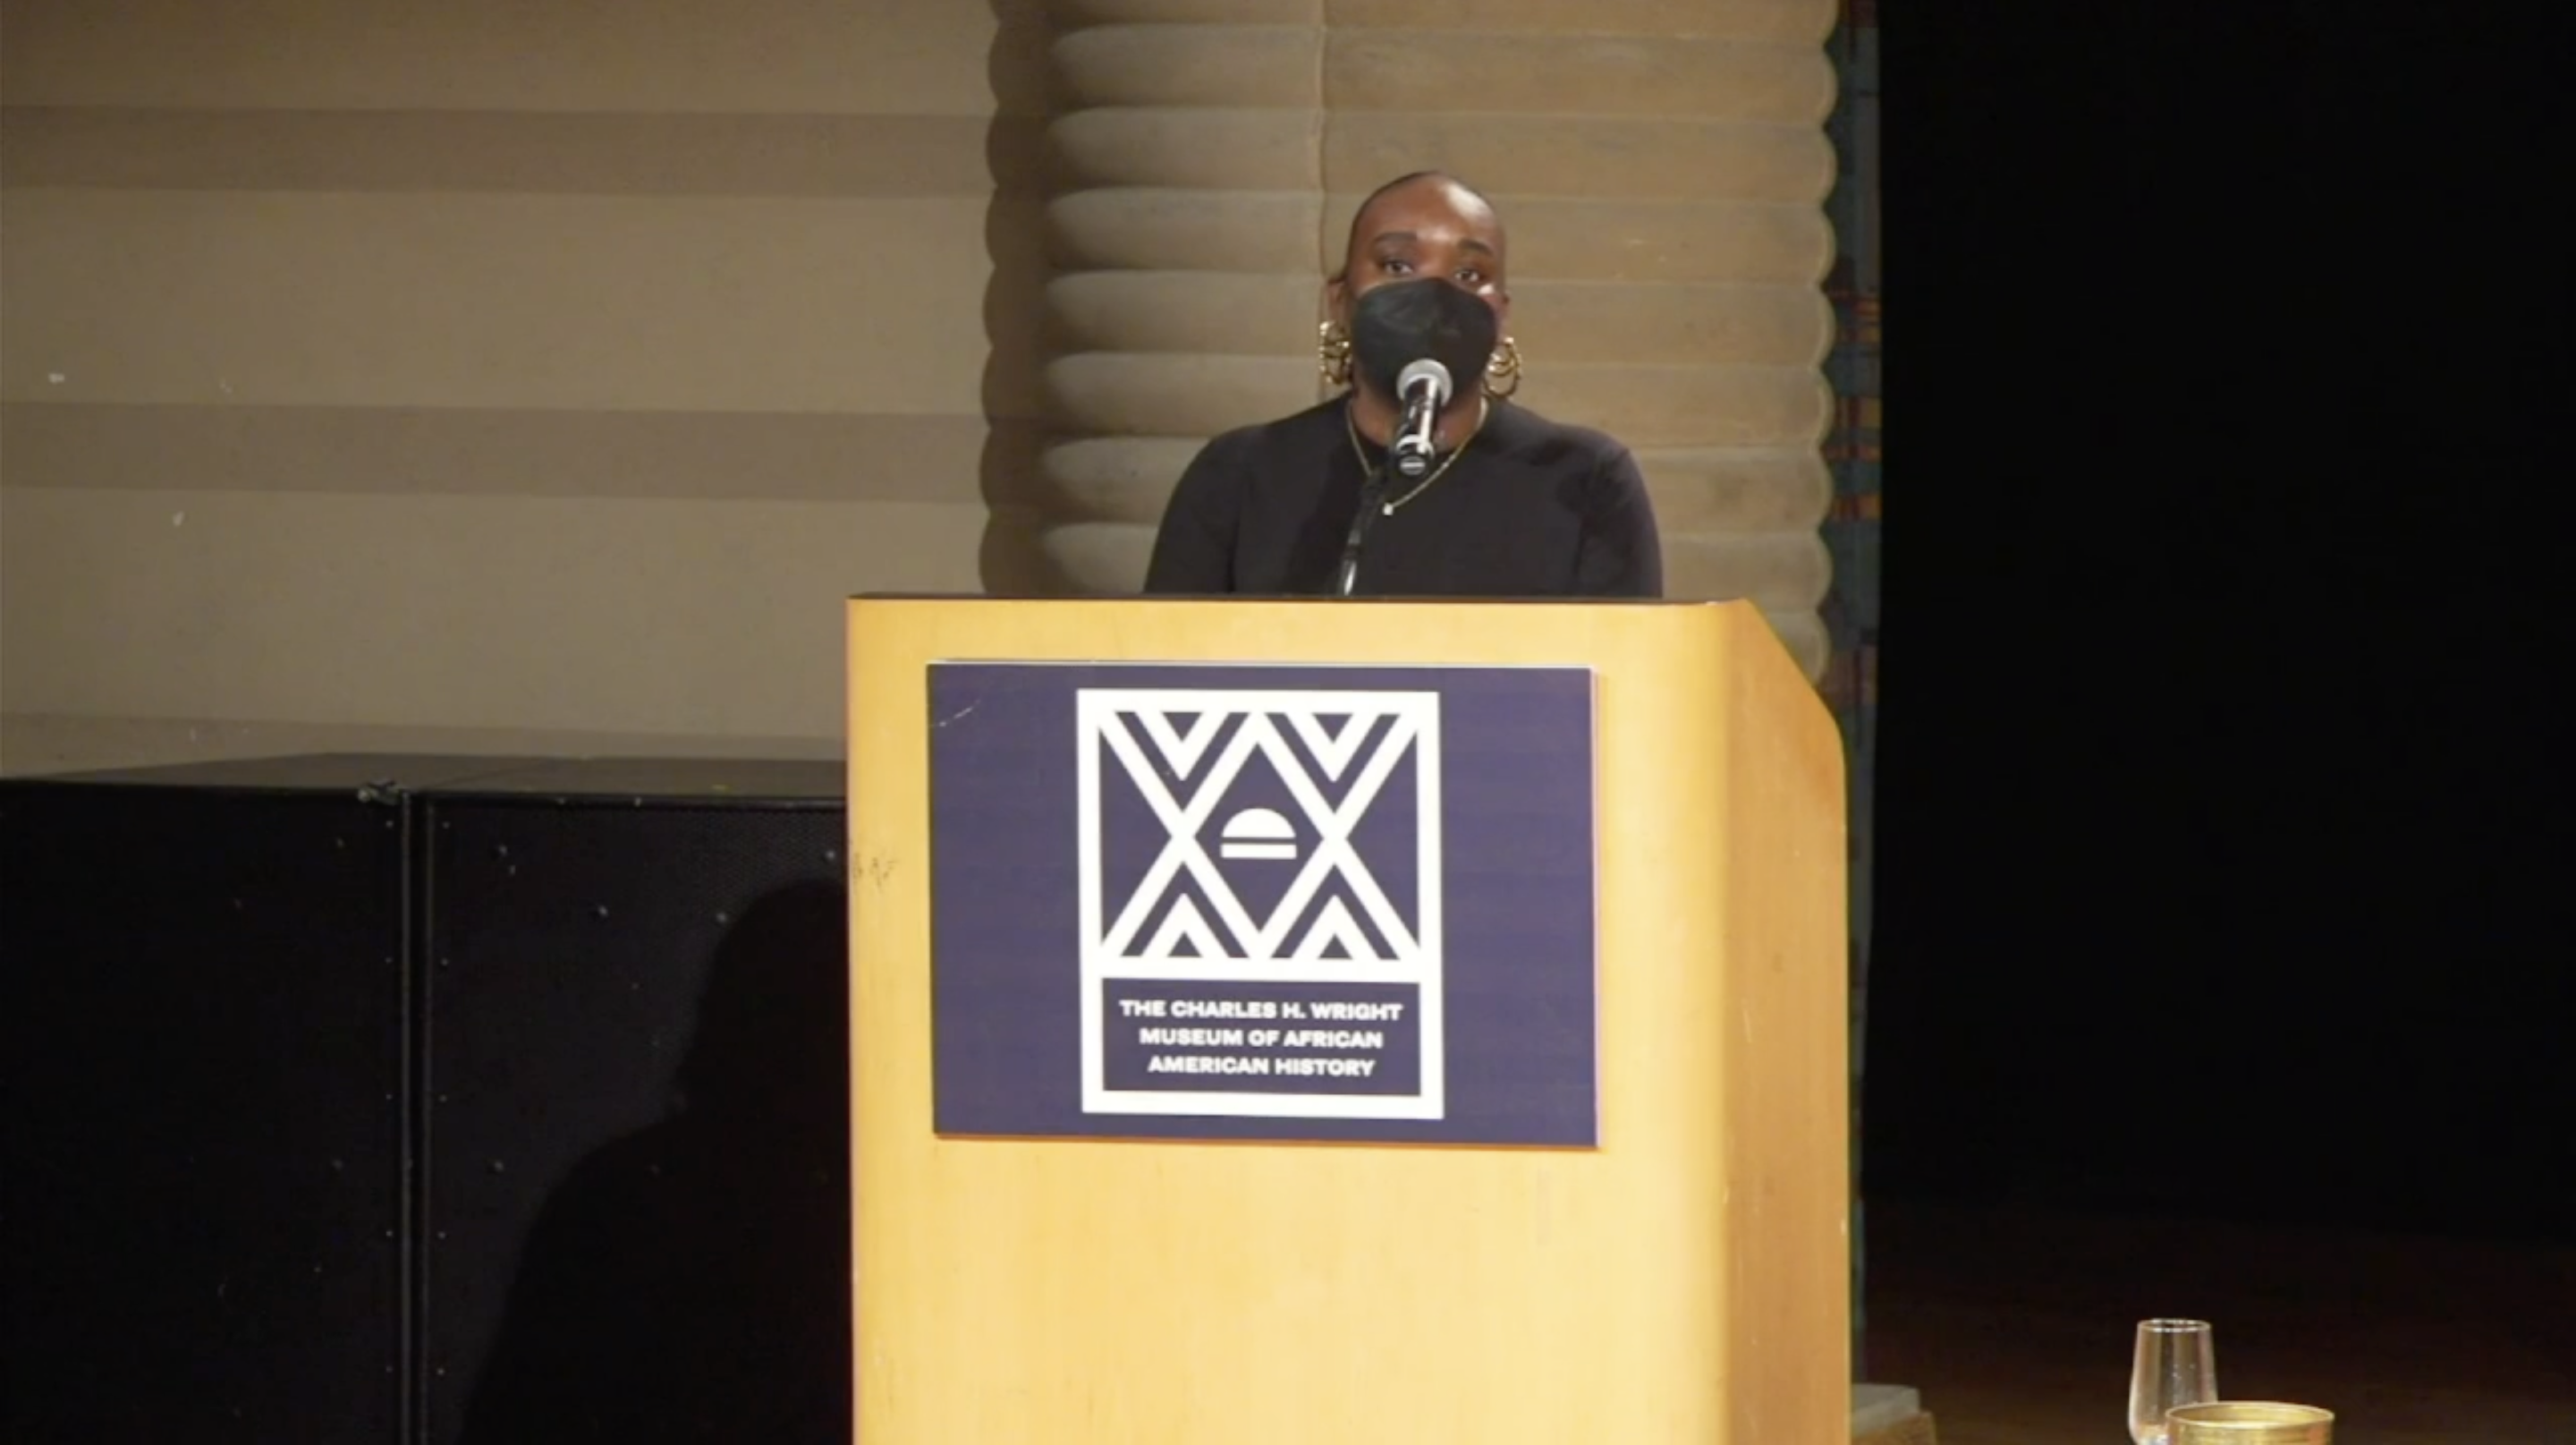 Woman speaking at a podium. She is wearing a black face mask and black top.